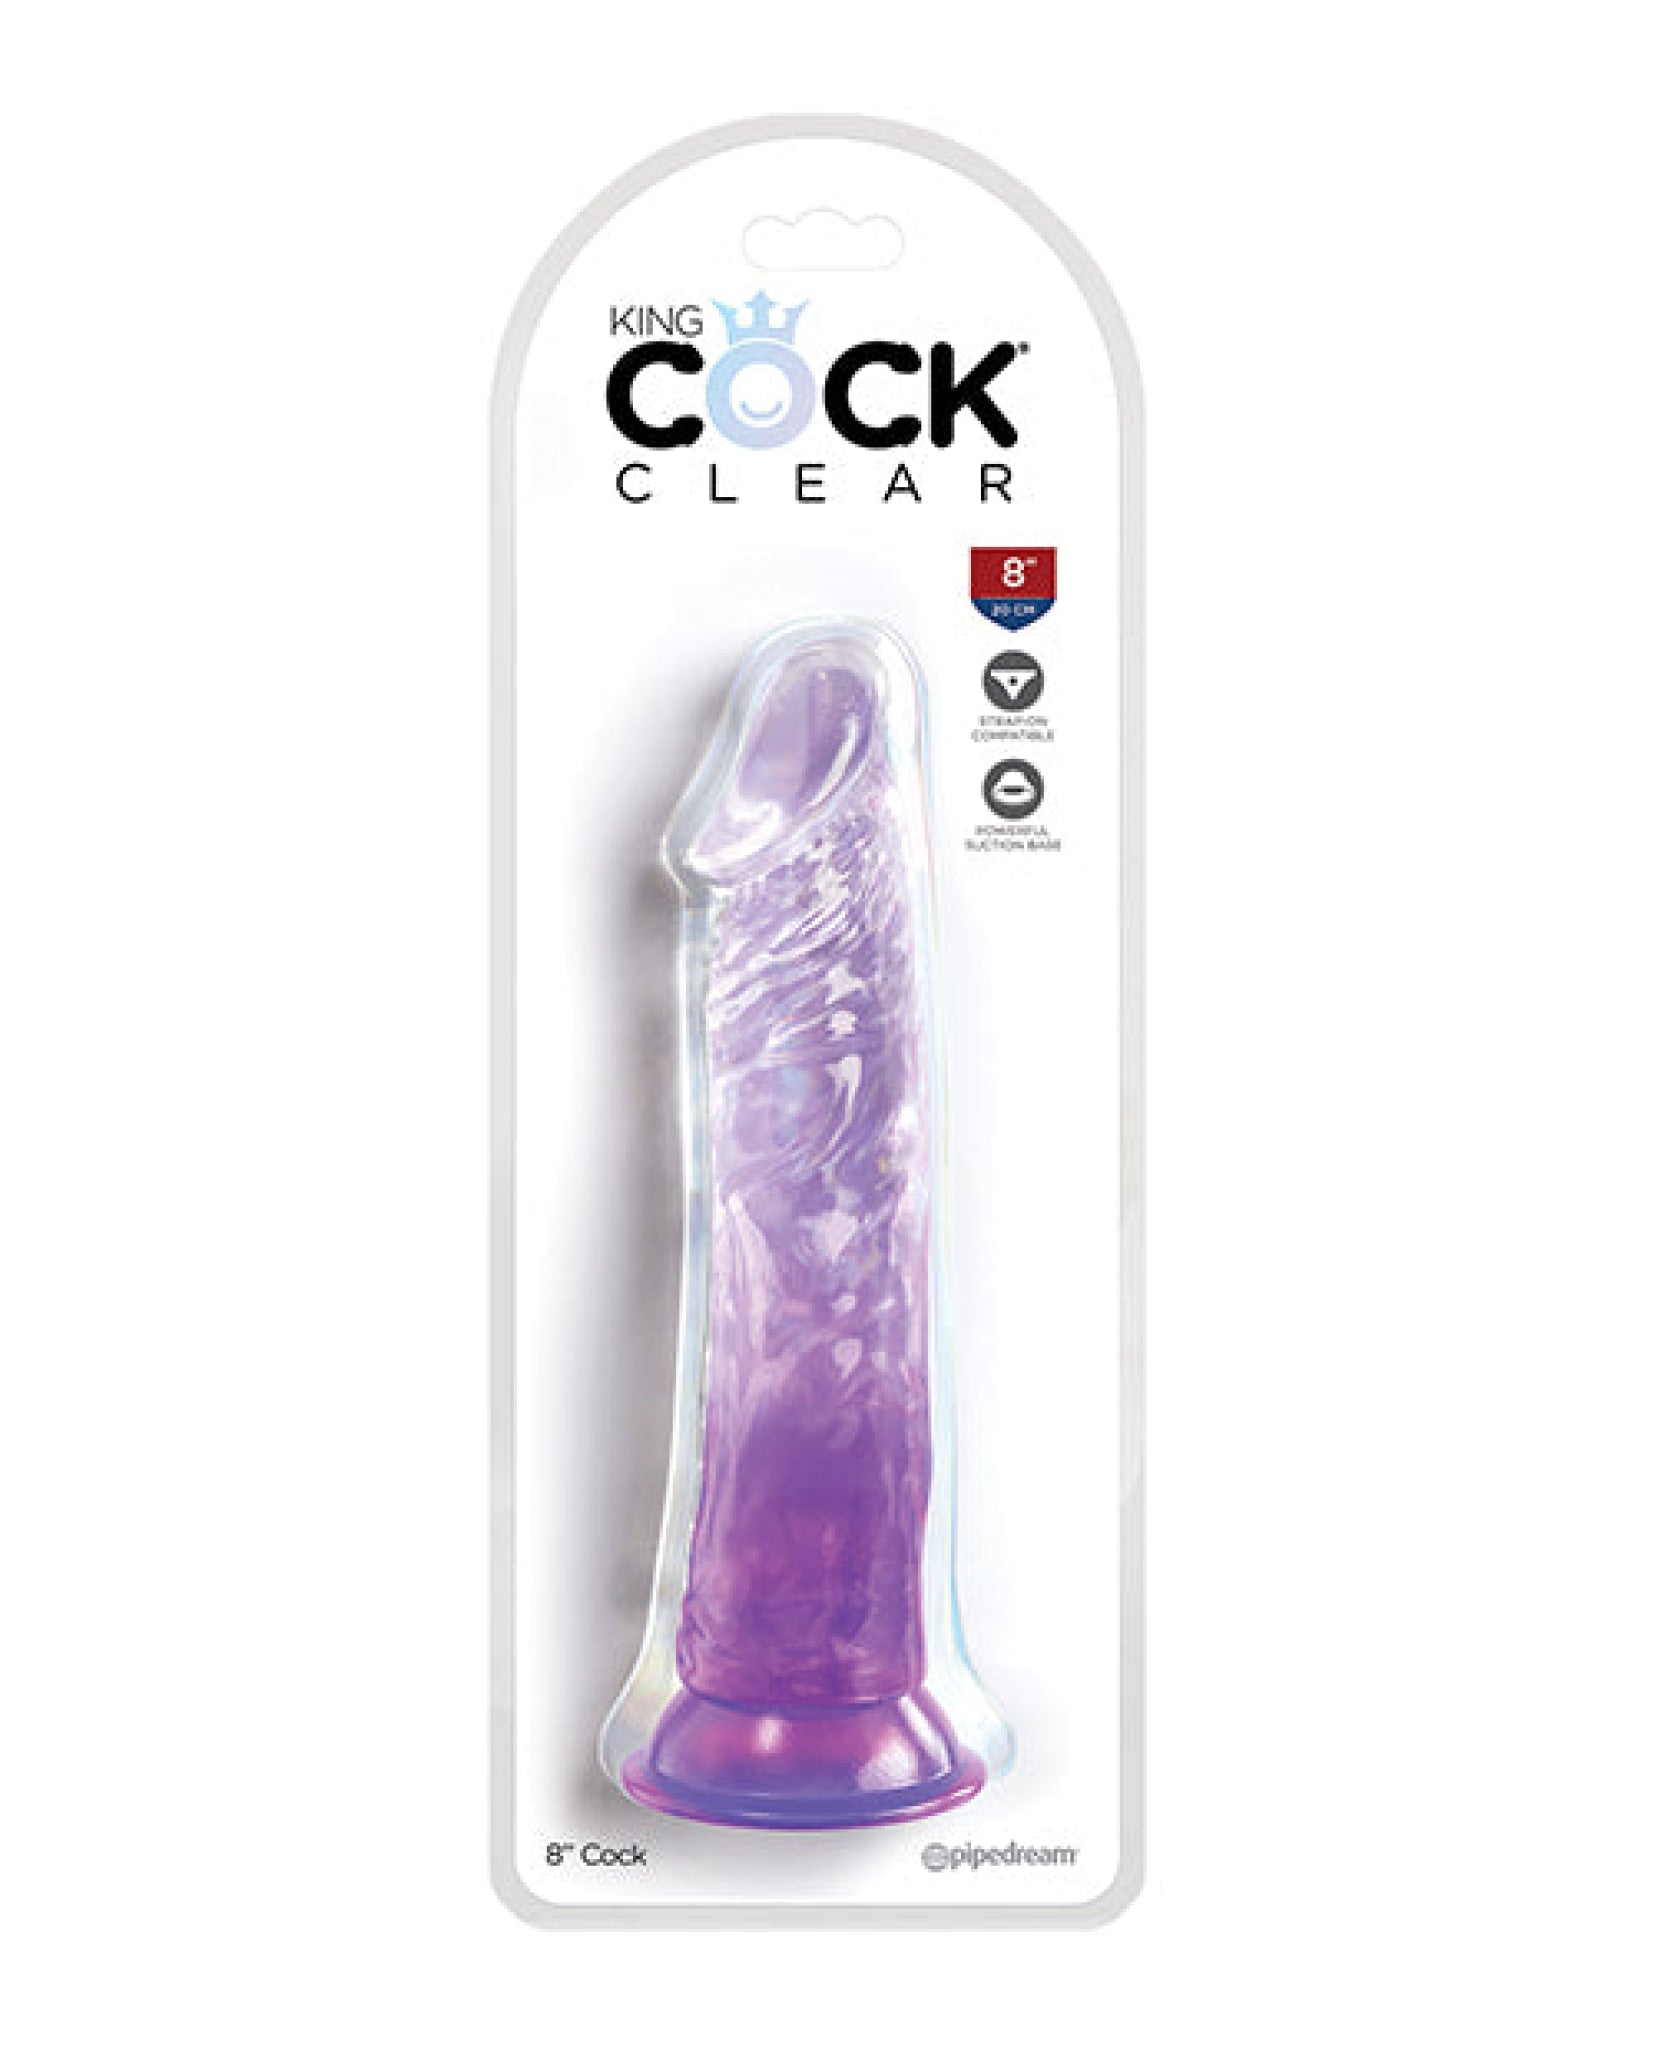 King Cock Clear 8" Cock Pipedream®